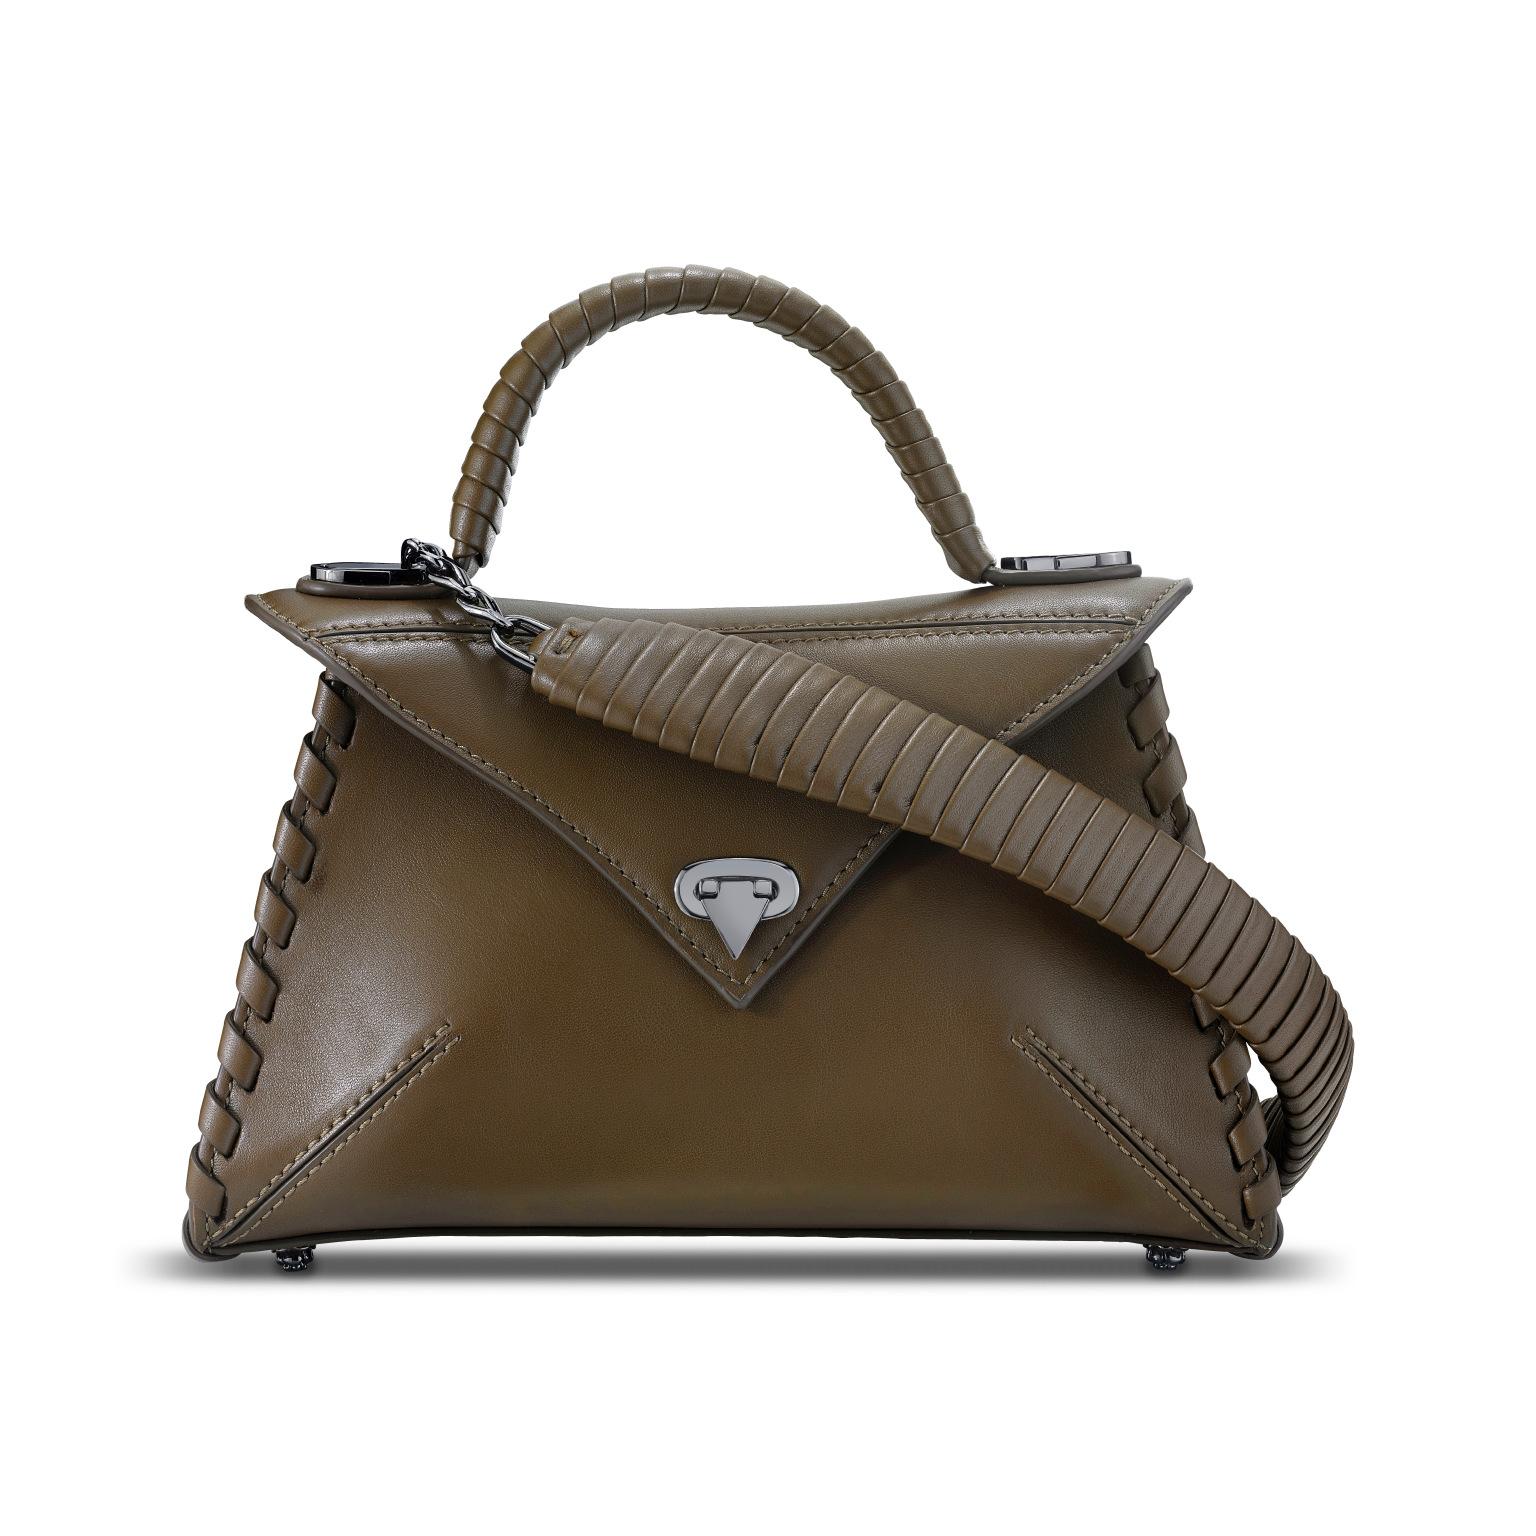 The LJ is featured in Truffle Leather with gunmetal hardware. This semi-structured handbag has a triangular front-flap and our custom Spear-lock Closure. It is designed with a leather-wrapped top-handle, handmade “whip-stitch” detail and an optional